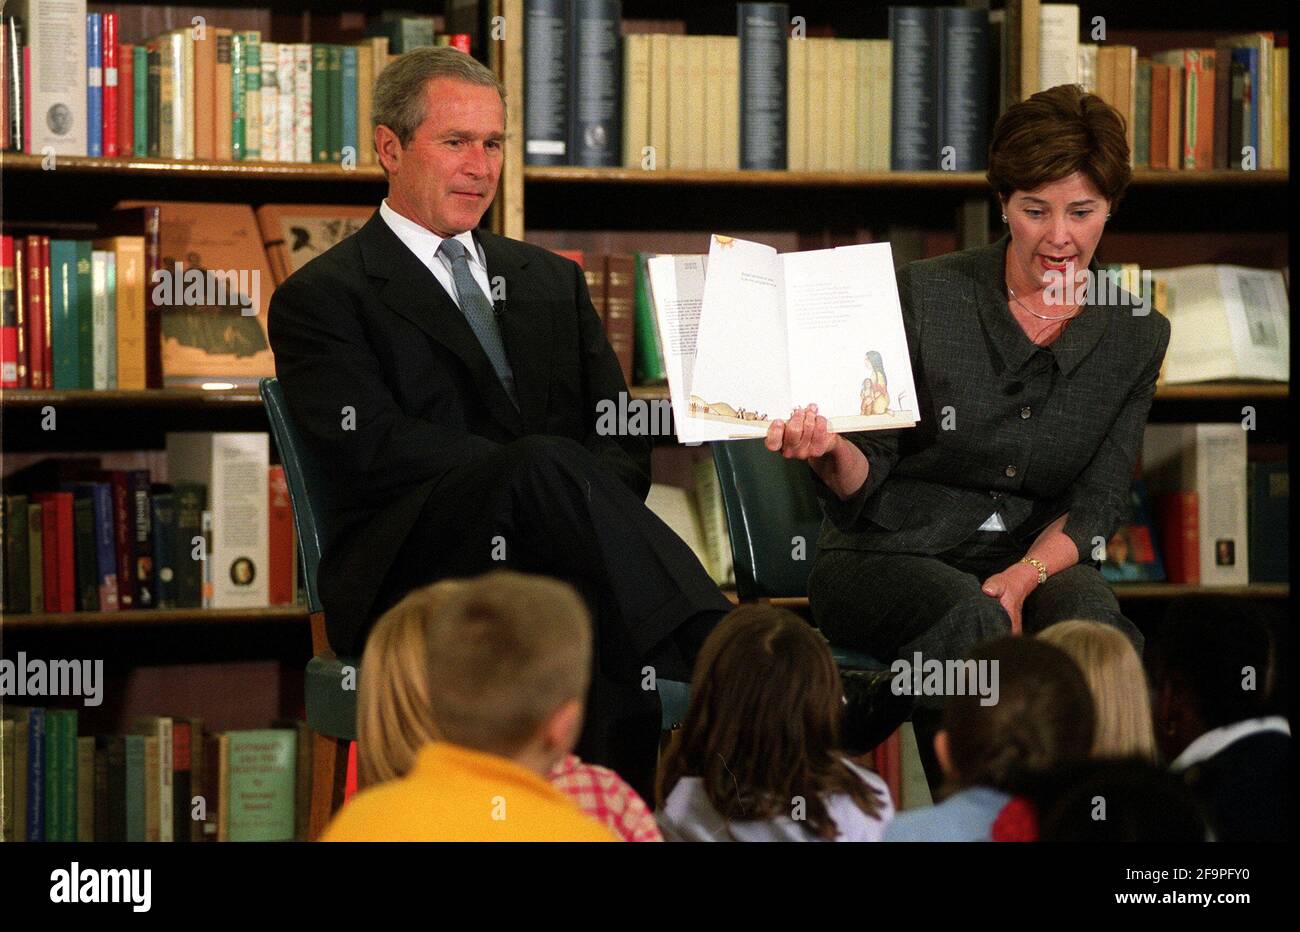 US President Bush and first lady Laura talk to children during a visit to the British Museum in central London, Thursday July 19, 2001.  The President is on a brief visit toBritain on his way to a G8 summit in Italy/  Tom Pilston Stock Photo